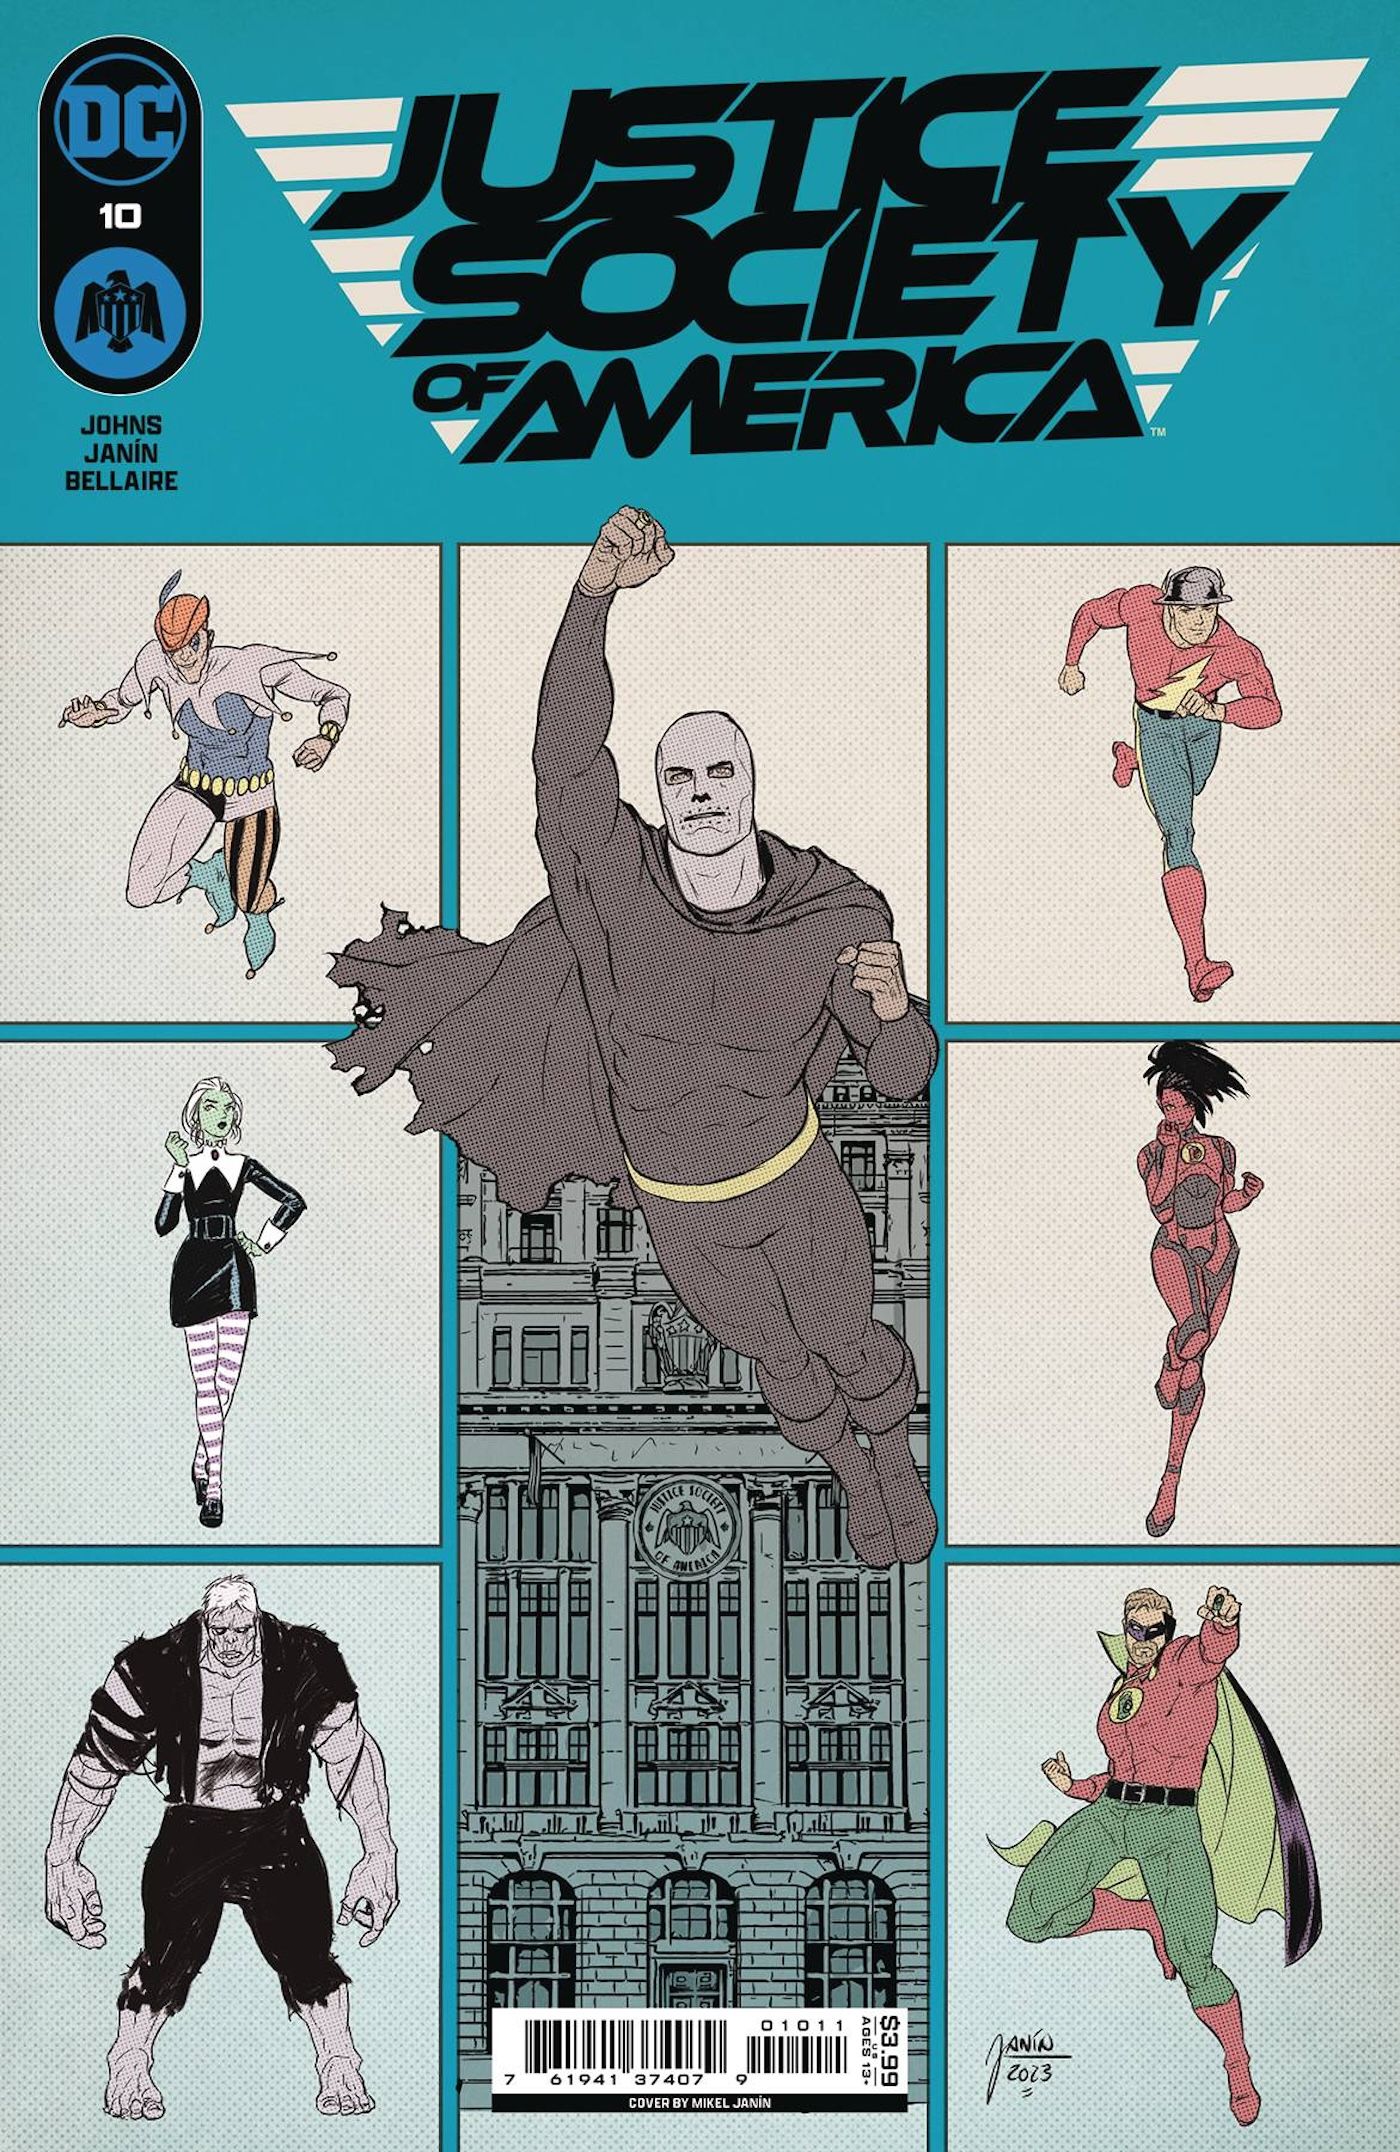 Justice Society of America 10 Main Cover: JSA members in individual boxes surrounding the team brownstone.